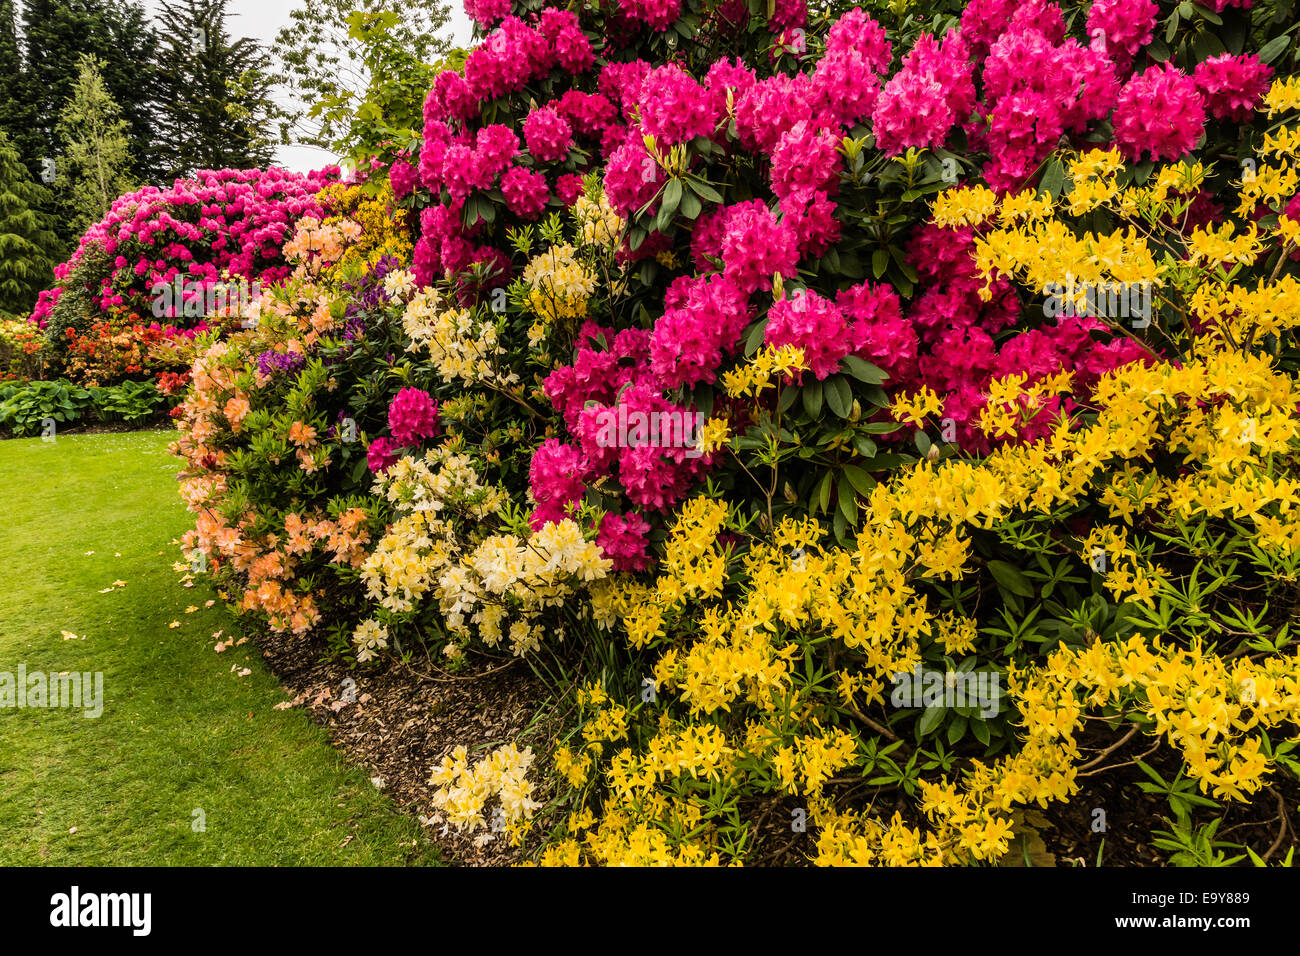 Yellow azaleas and pink rhododendrons in a border. Stock Photo